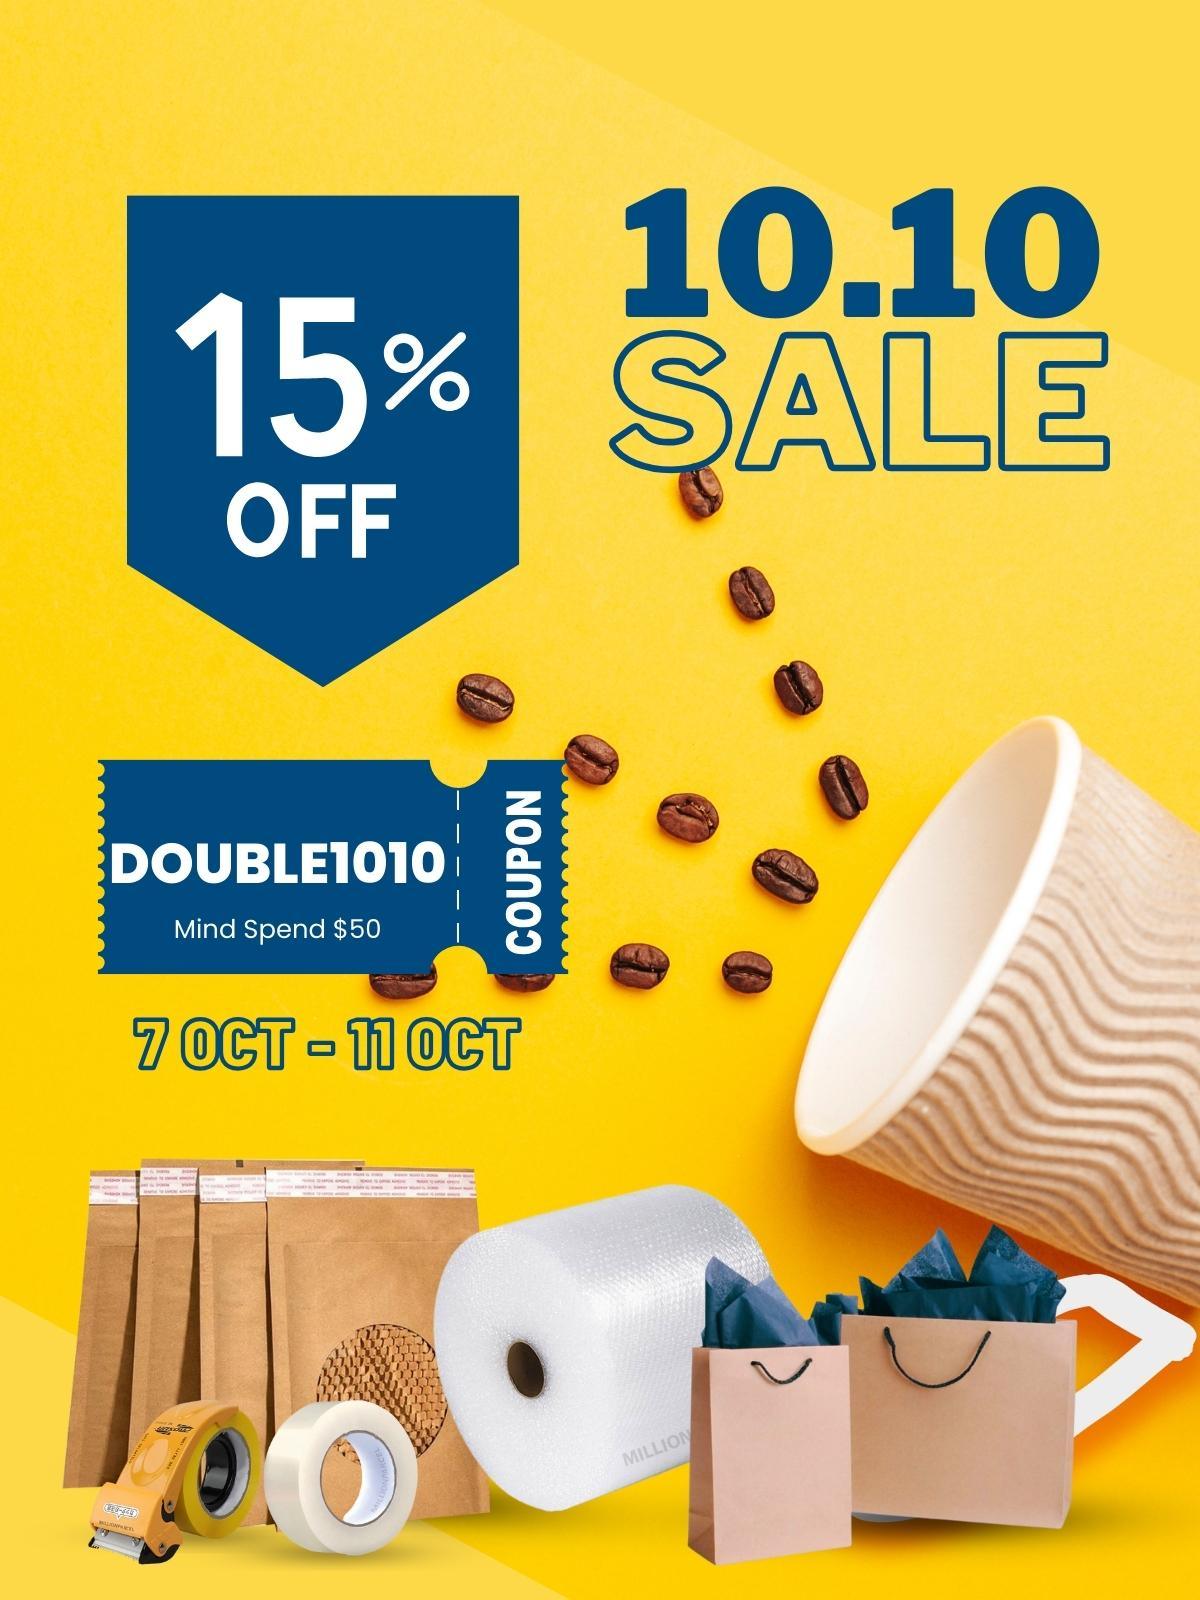 🌟 Get Ready for Double 10 - Exclusive Offer Inside! 🌟 - MillionParcel